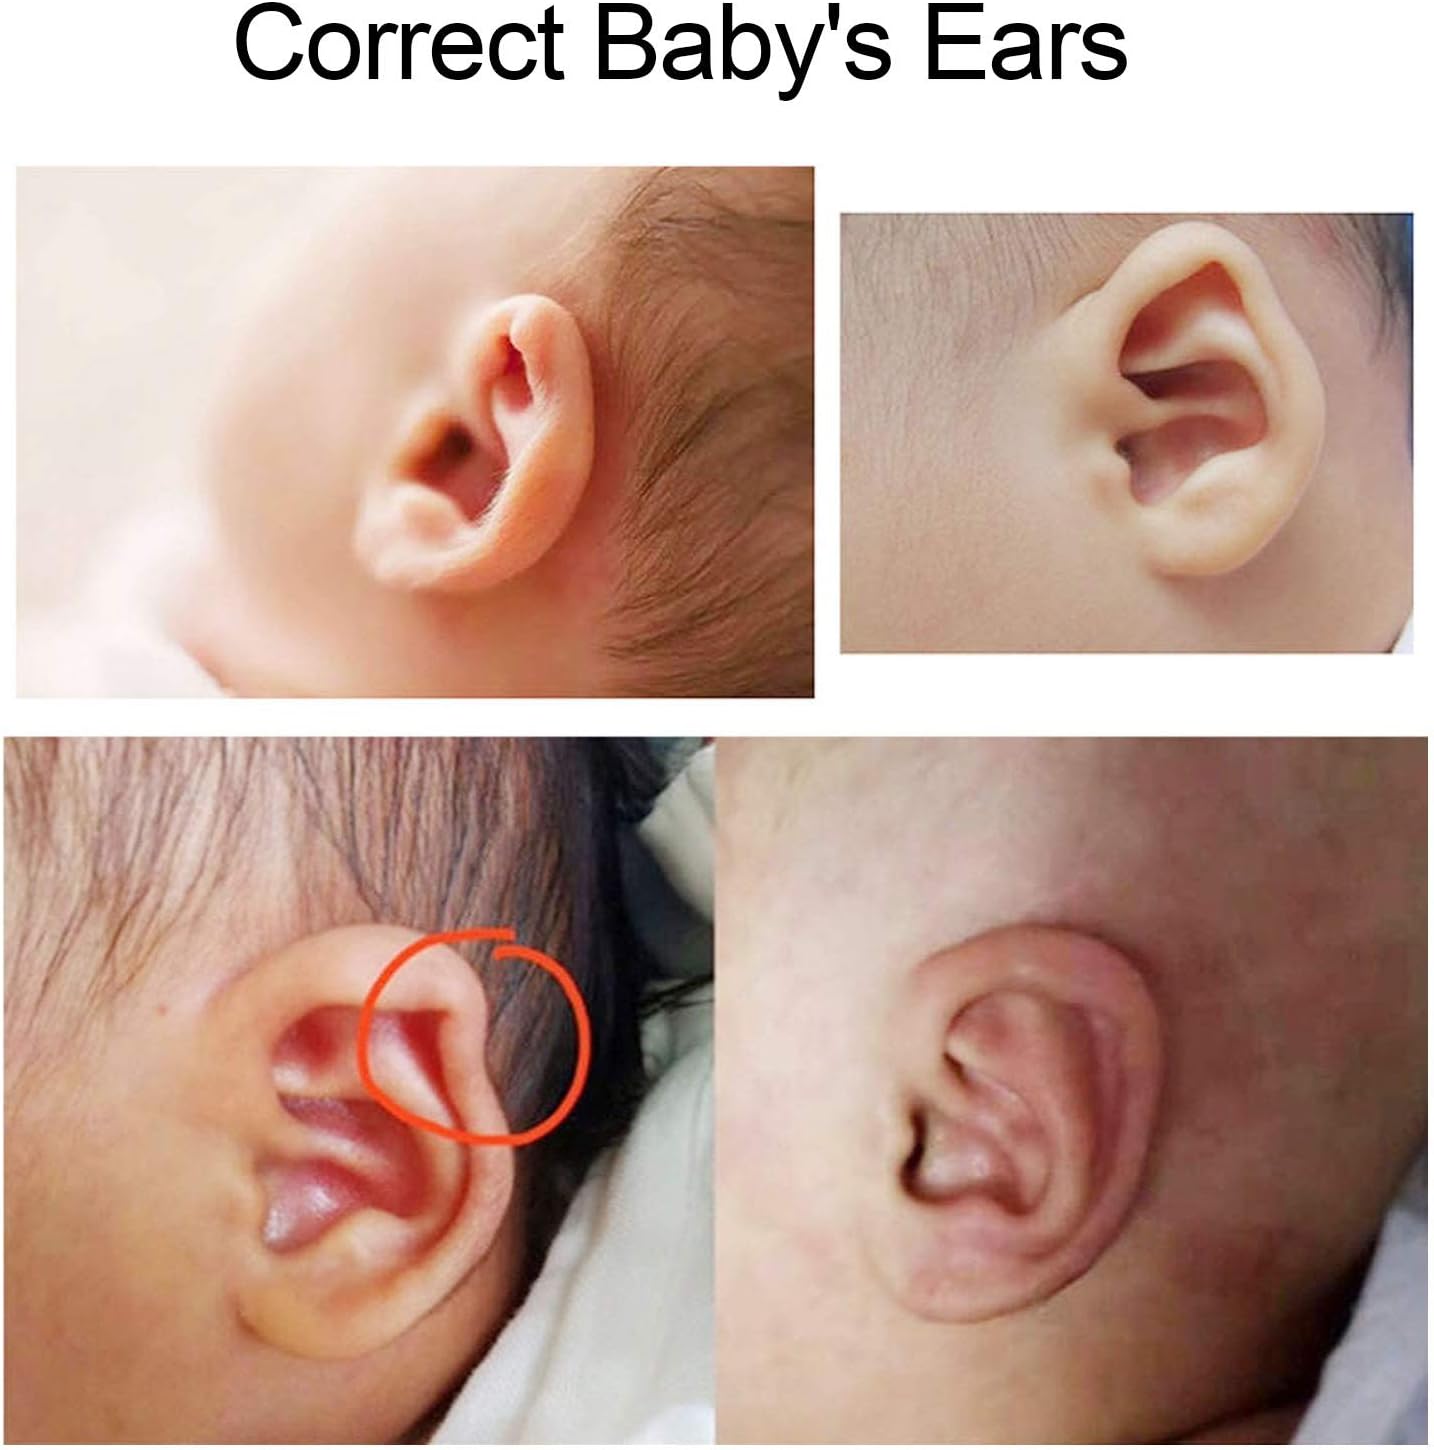 4 x 50cm Silicone Newborn Baby Ear Aesthetic Correctors, Kids Infant Protruding Ear Patch Stickers